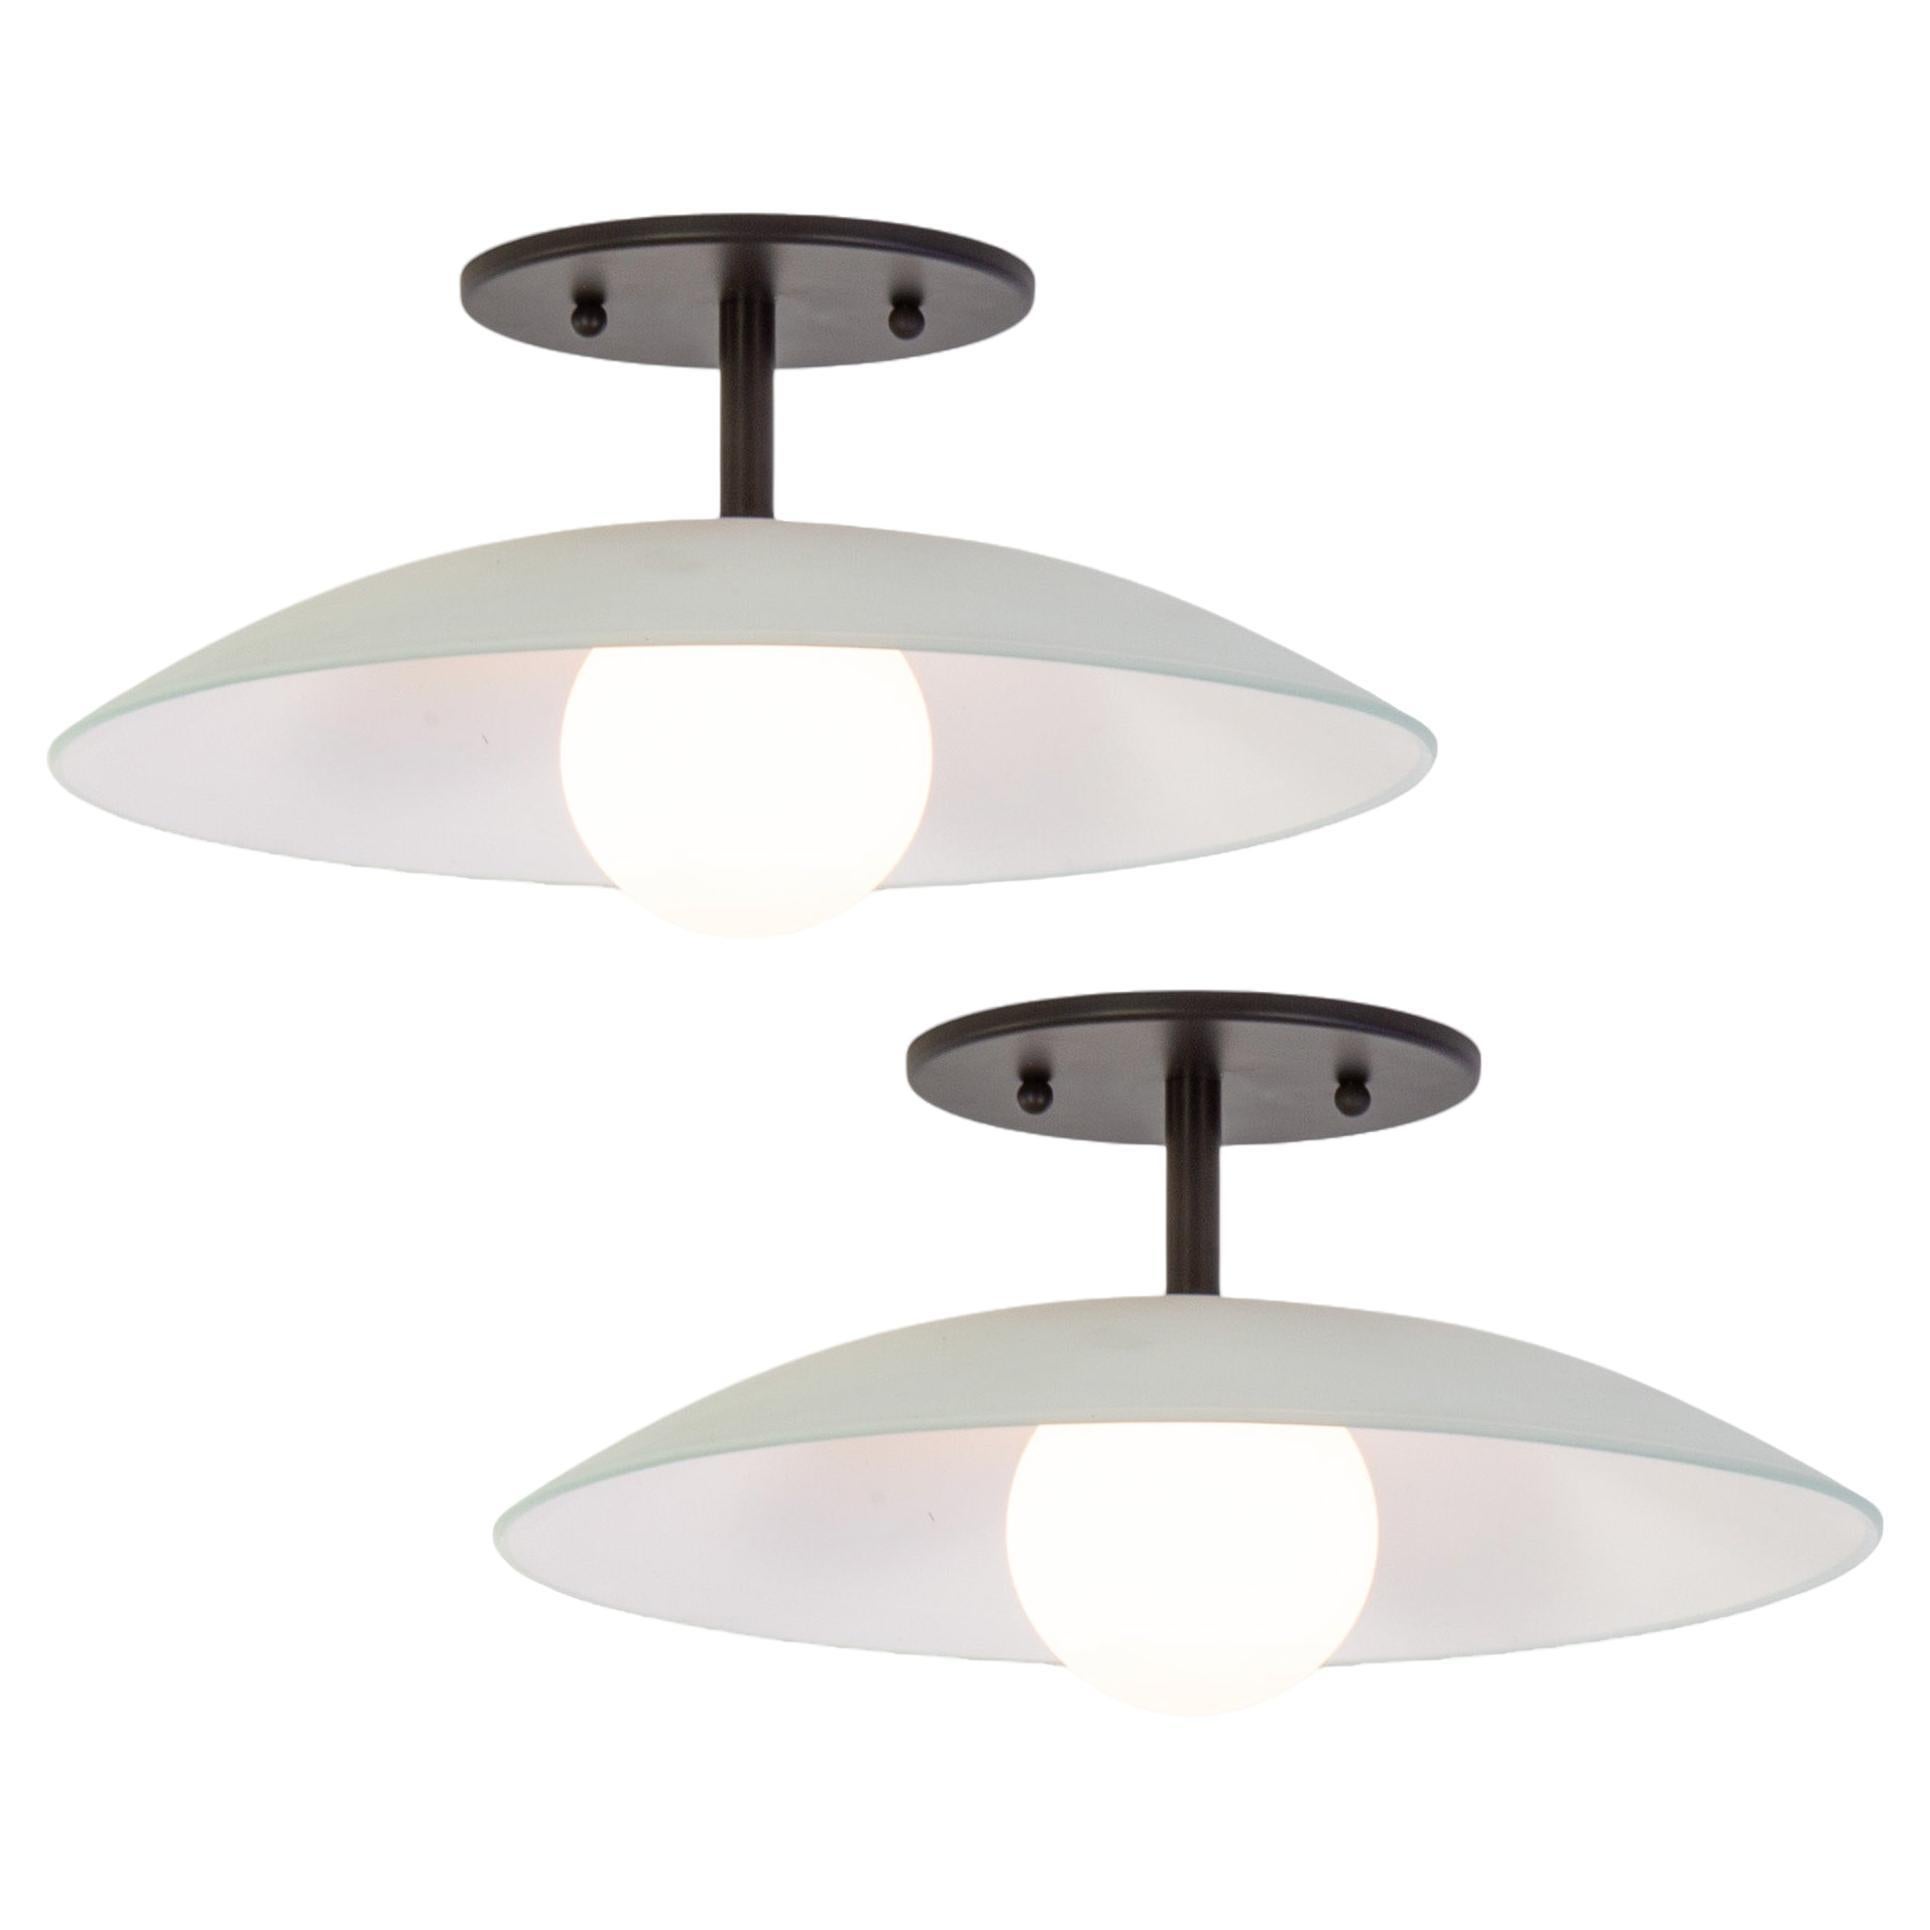 Pair of Dish Flush Mounts, by Research.Lighting, Glass Dome Shade, Made to order For Sale